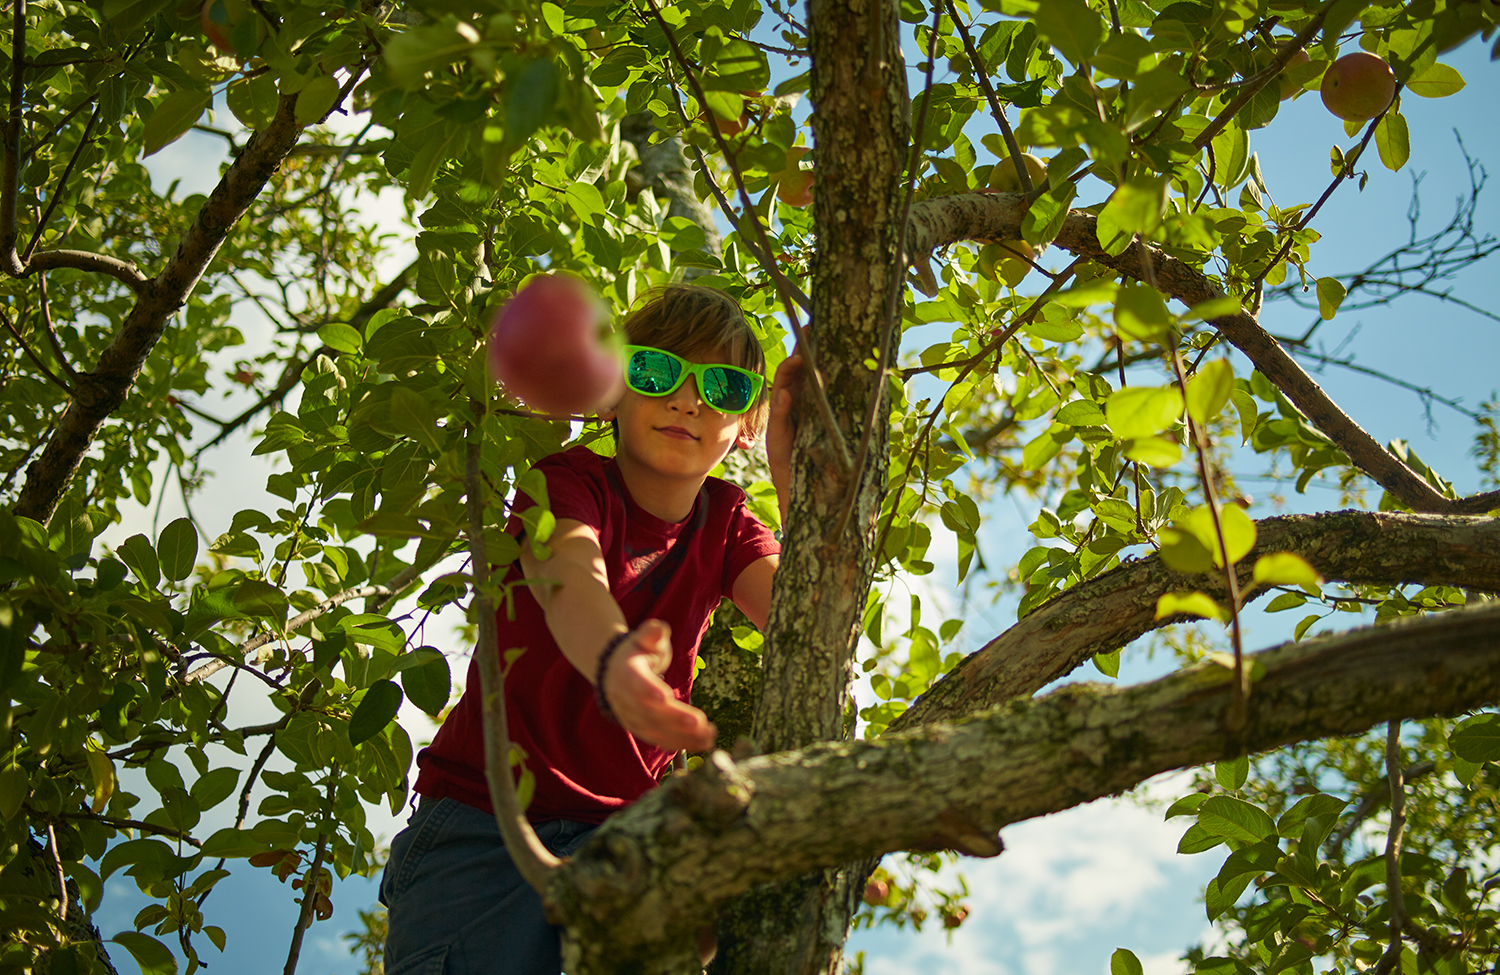 091915_Apple_Picking_OuthouseOrchards_406.jpg